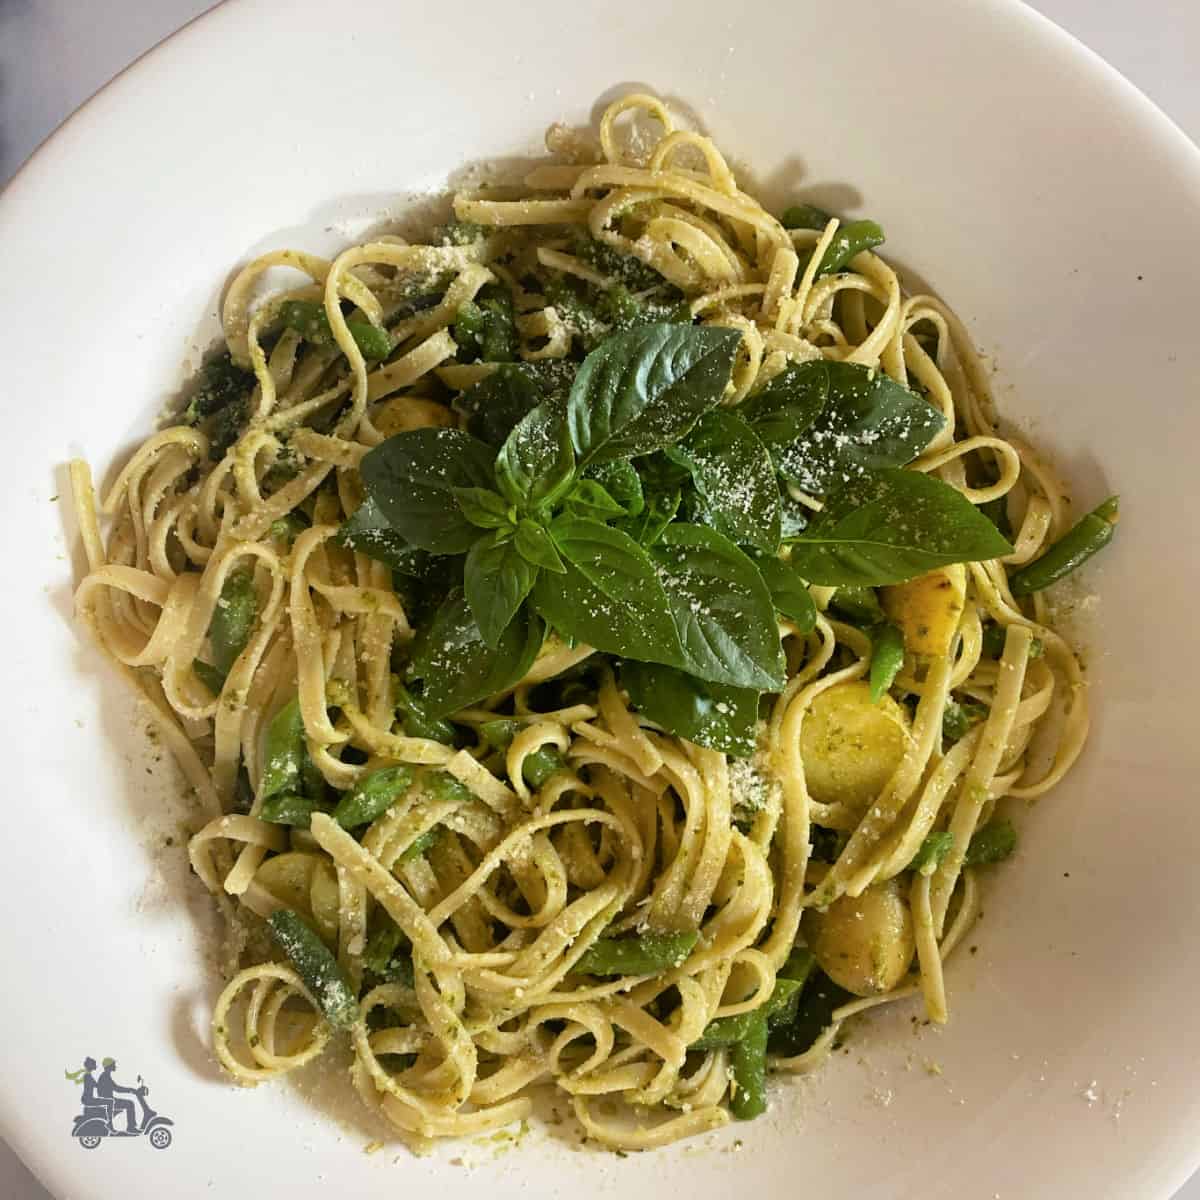 Pasta al Genovese Pesto in a white bowl made with green beans and Yukon Gold potatoes.